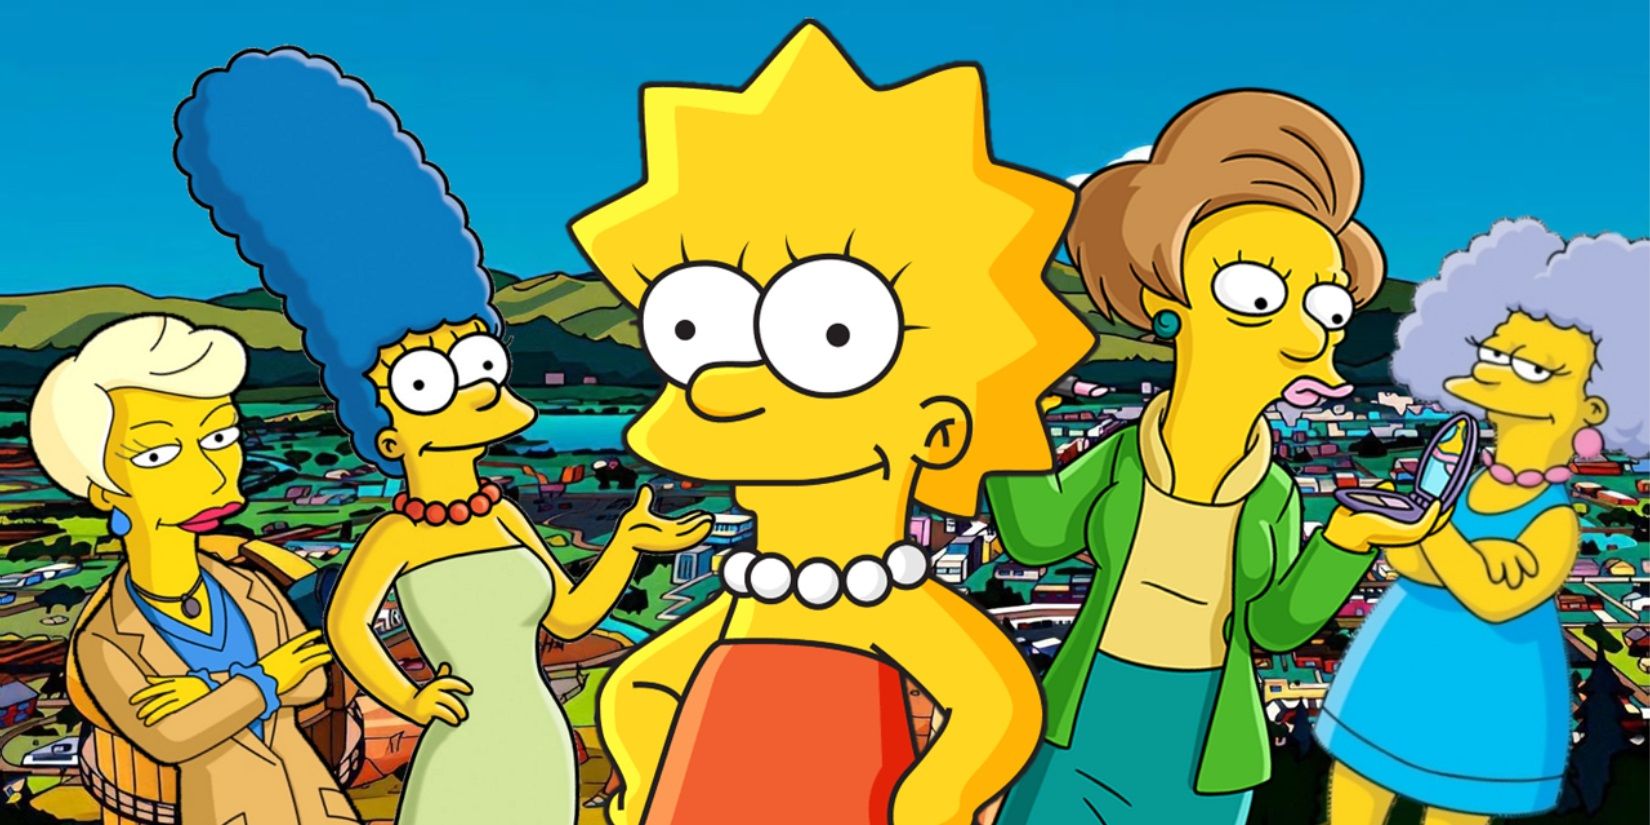 The Simpsons toFeature Death Note in Next Treehouse o...